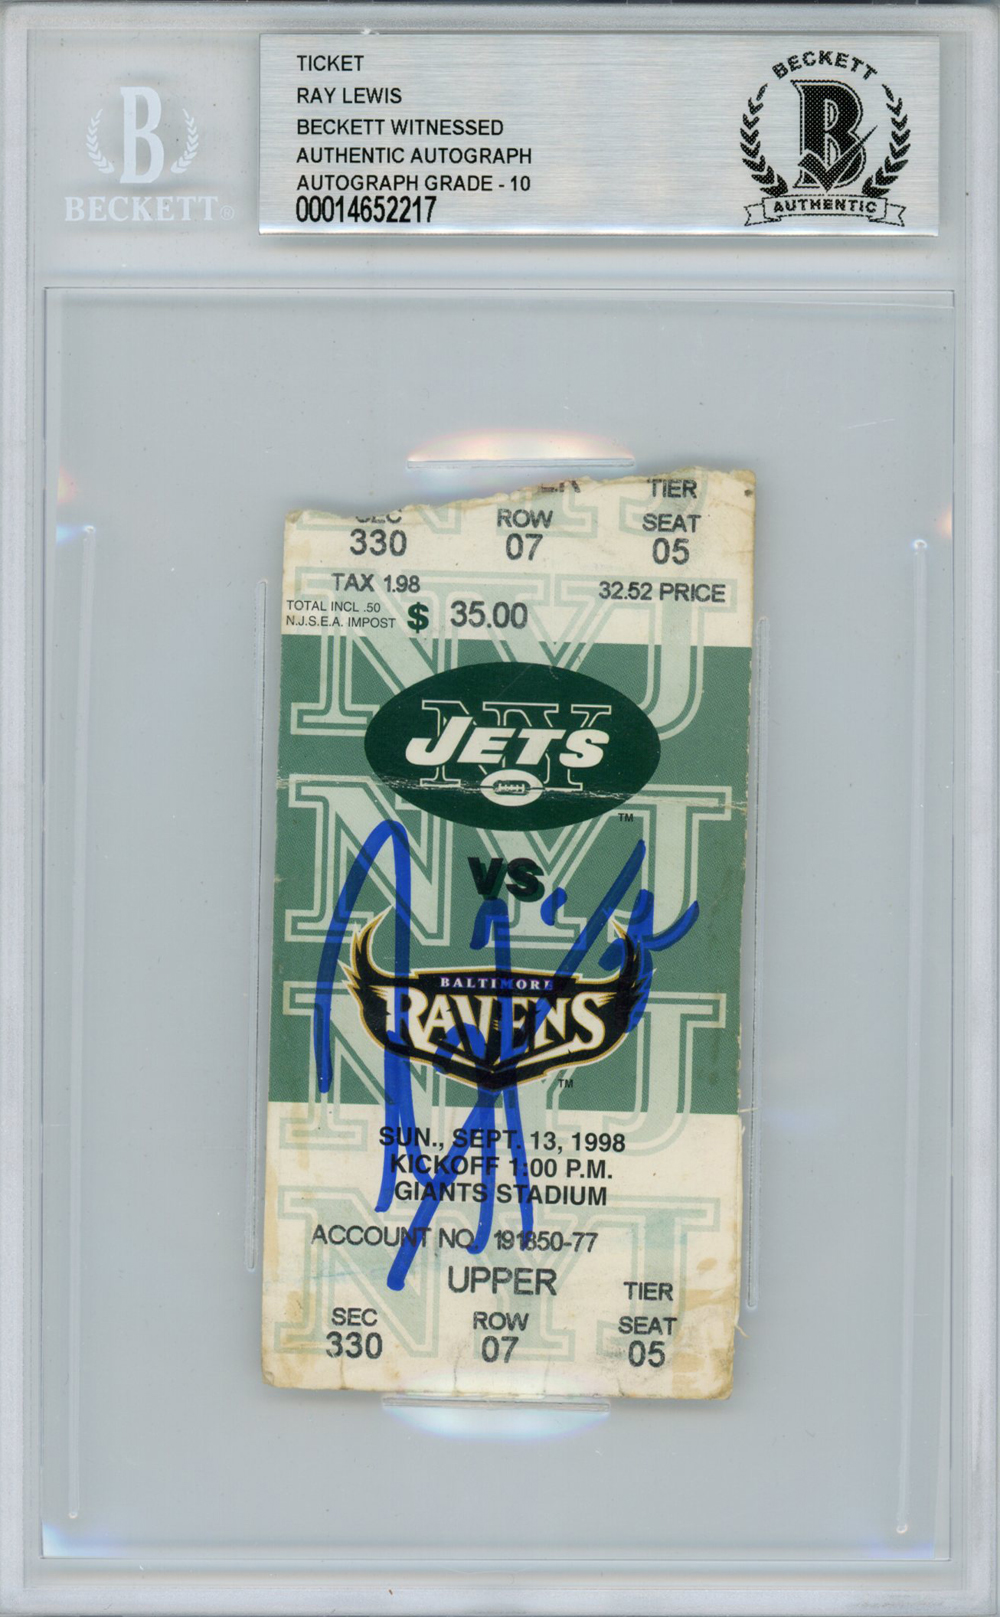 Ray Lewis Autographed/Signed 9/13/1998 vs Jets Ticket Beckett Slab